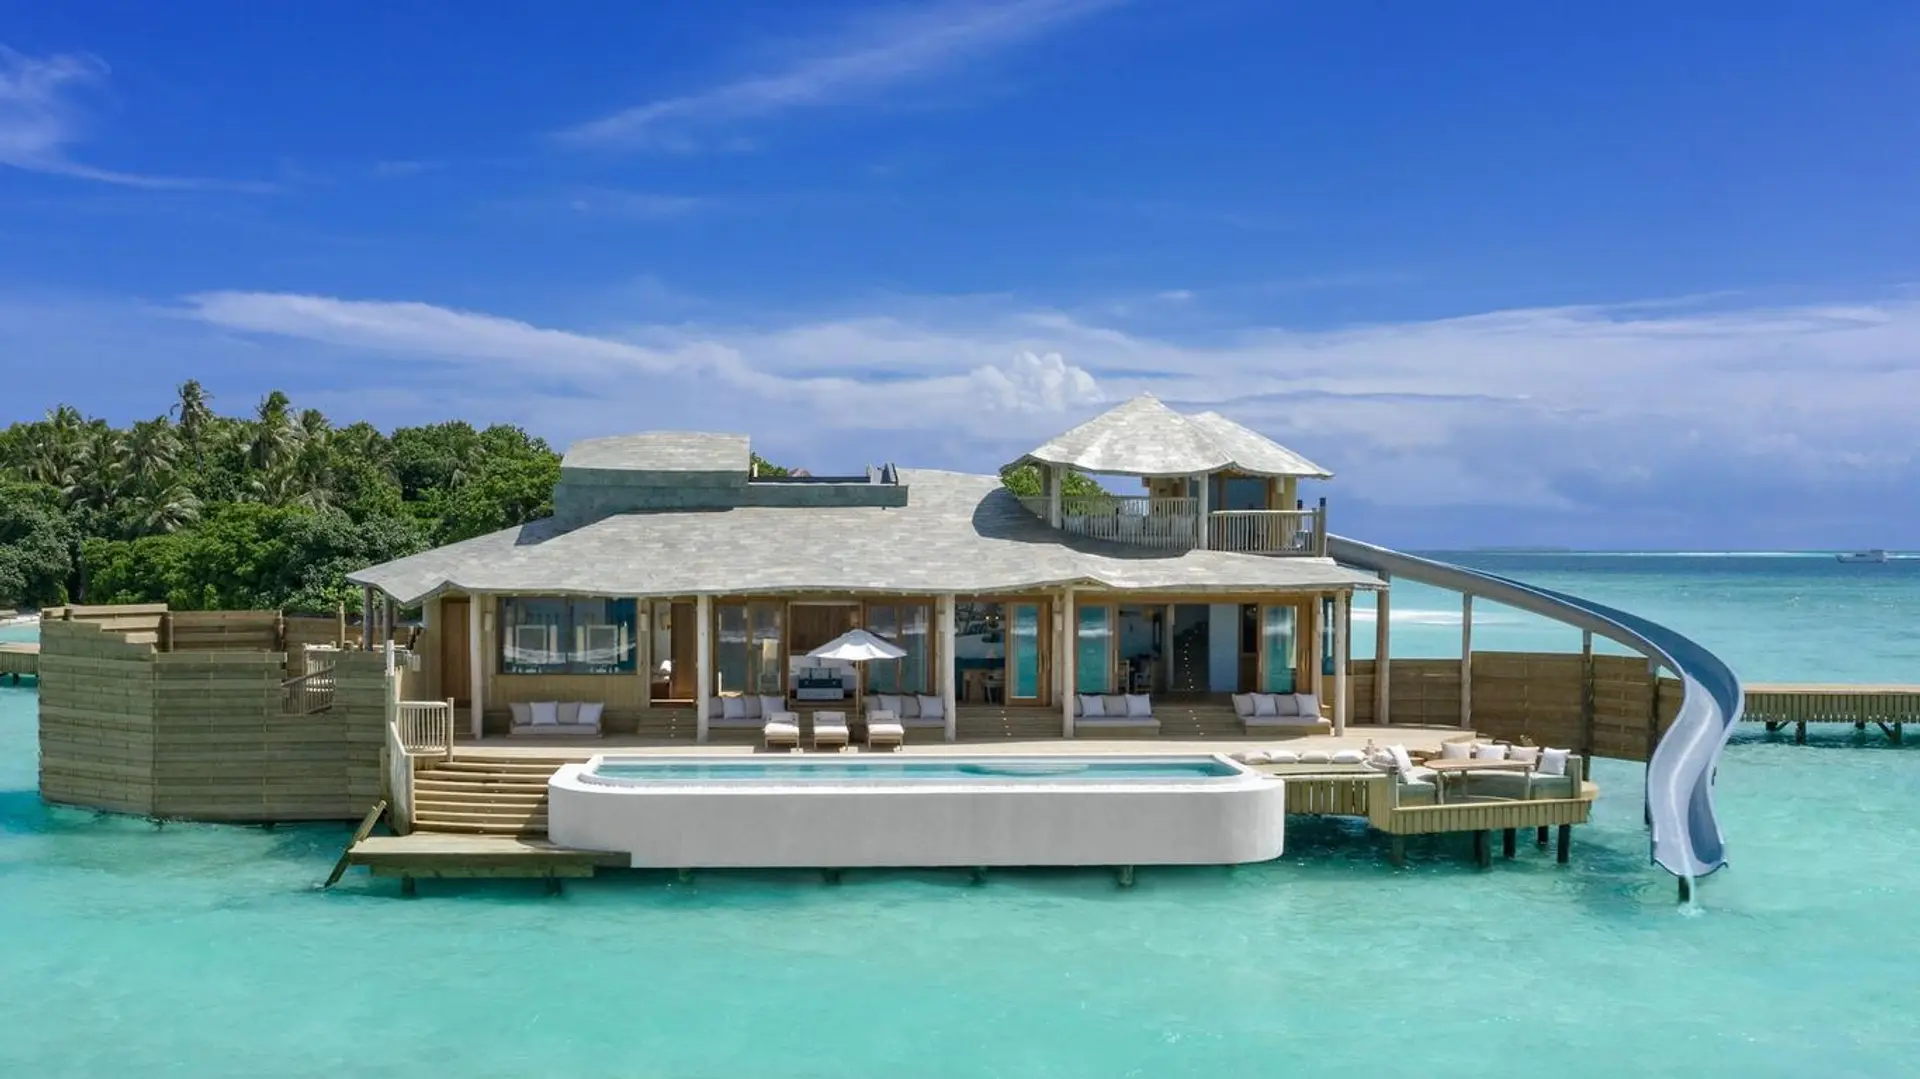 Hotels News - Soneva brings the Maldives in to your home with Virtual Reality